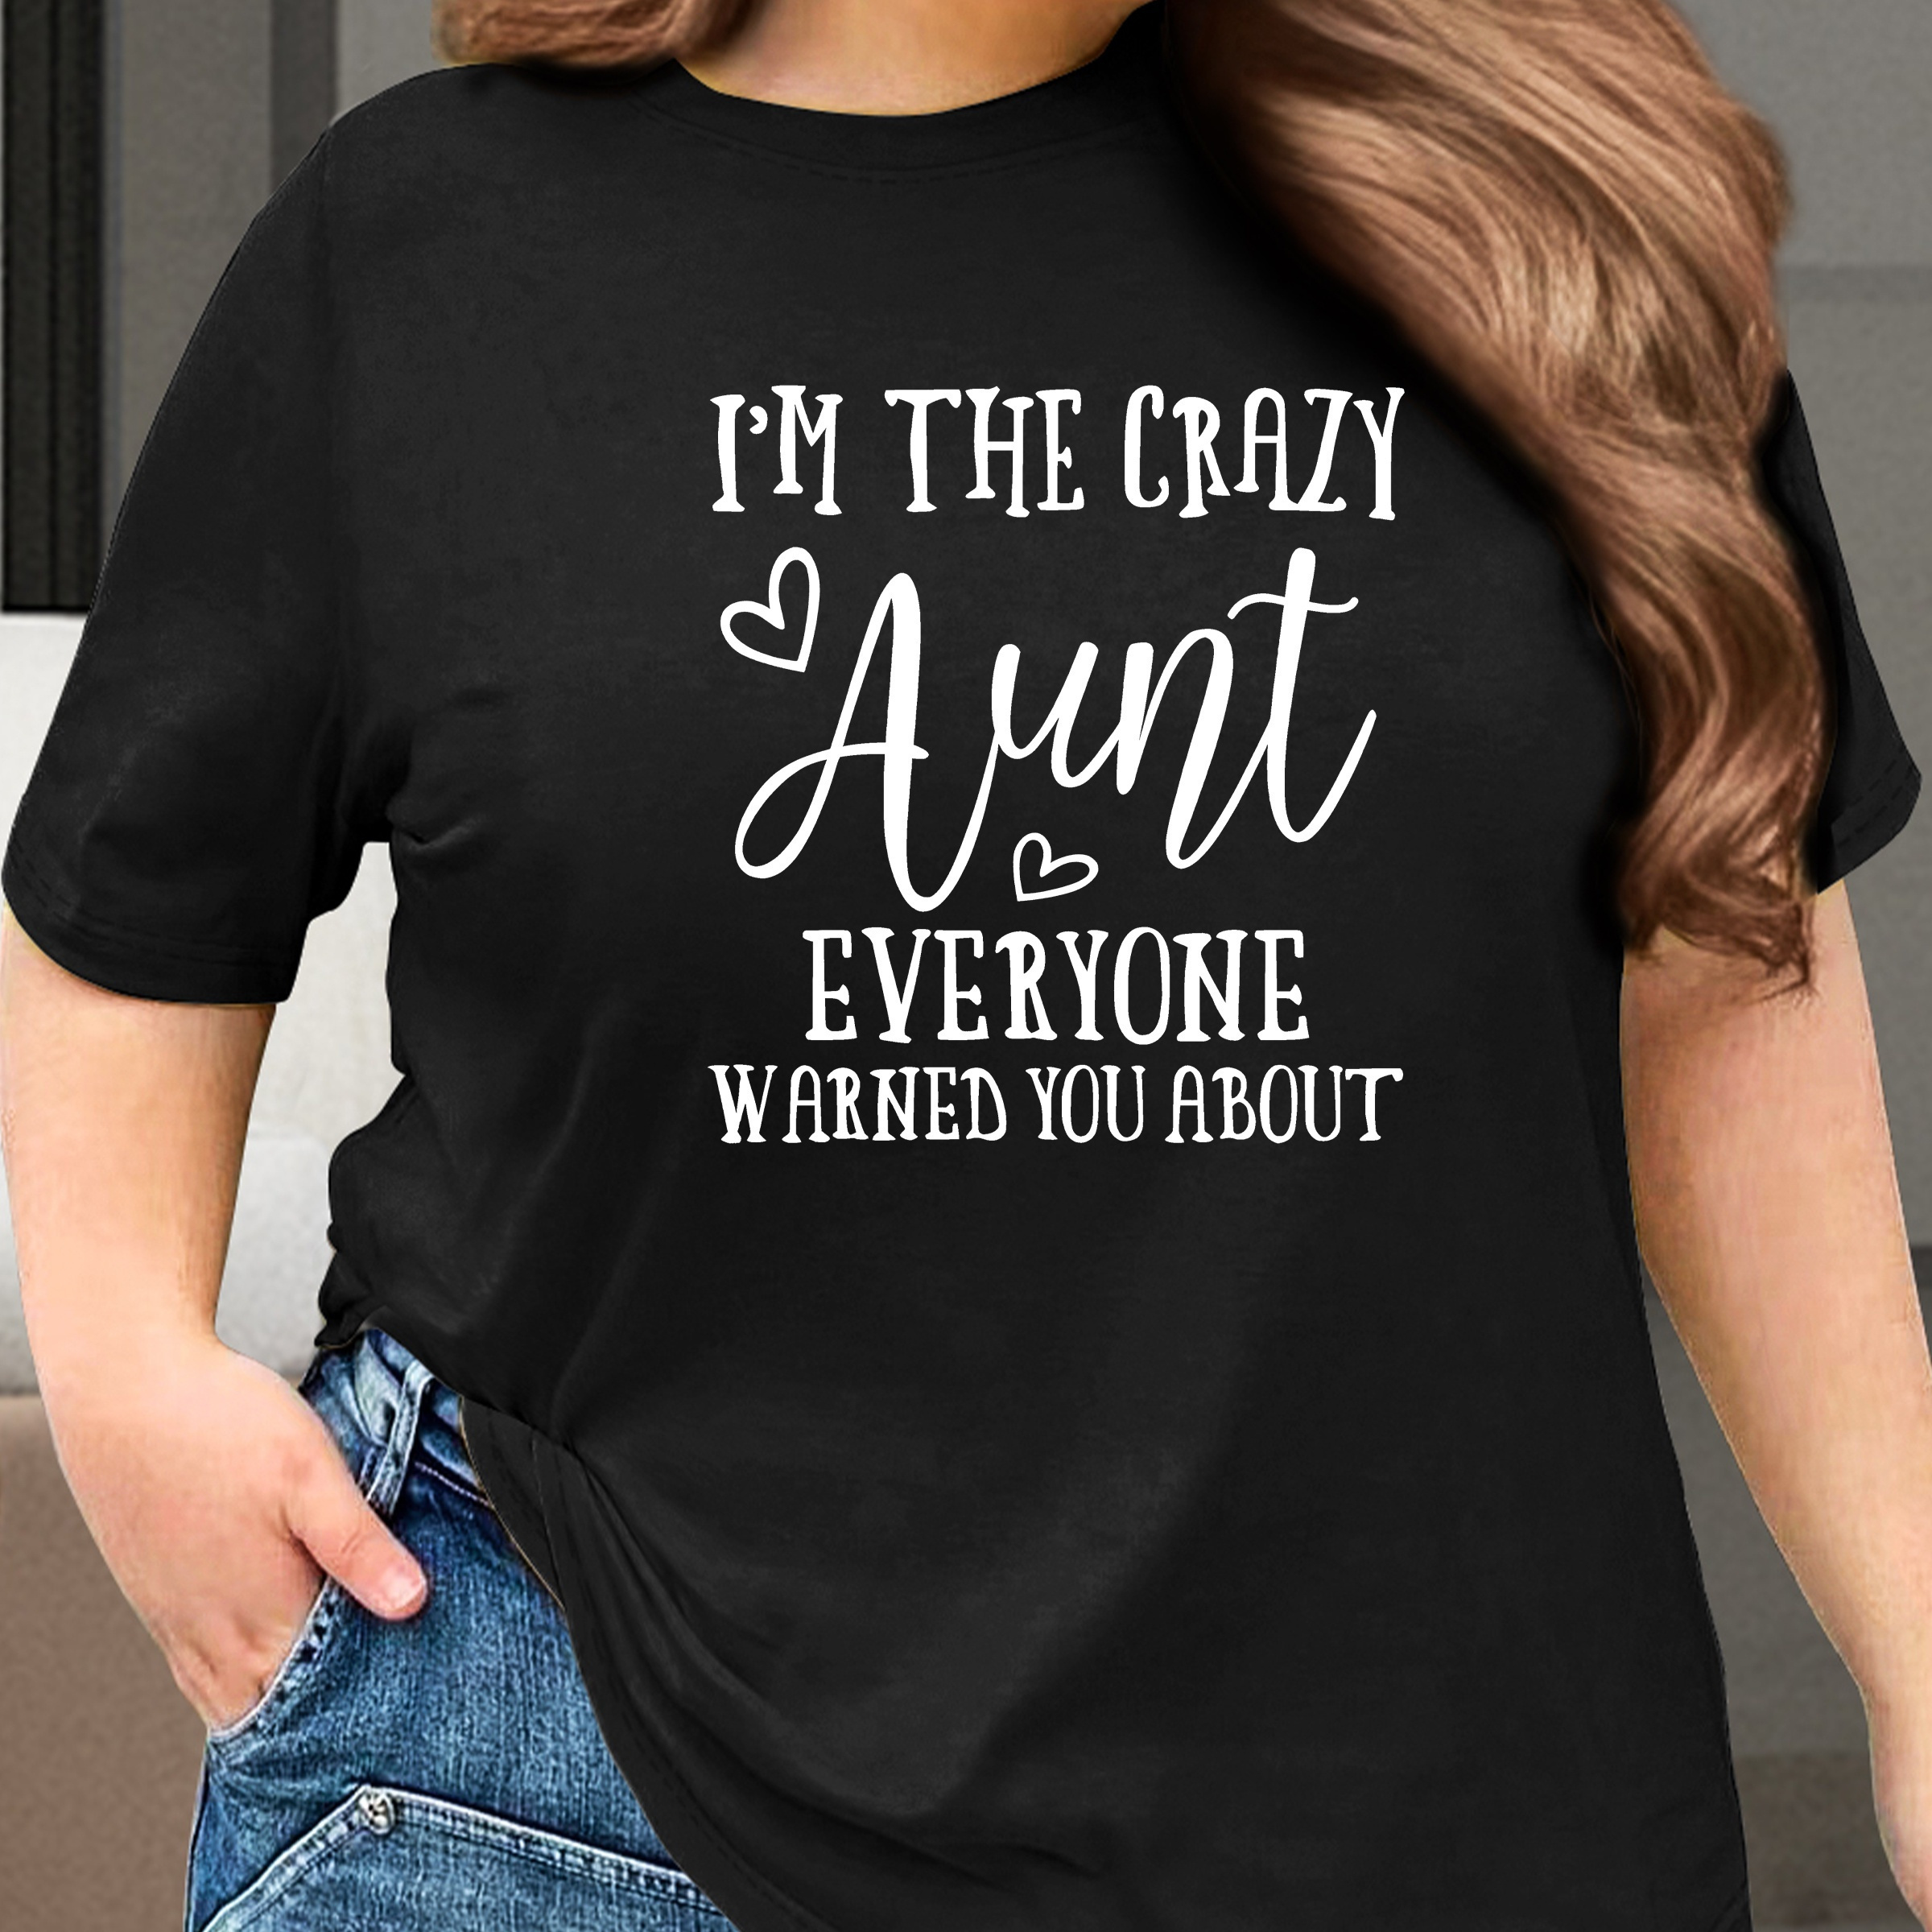 

Women's Plus Size Casual Sporty T-shirt, "i'm The Crazy Aunt" Heart Print, Comfort Fit Short Sleeve Tee, Fashion Breathable Casual Top